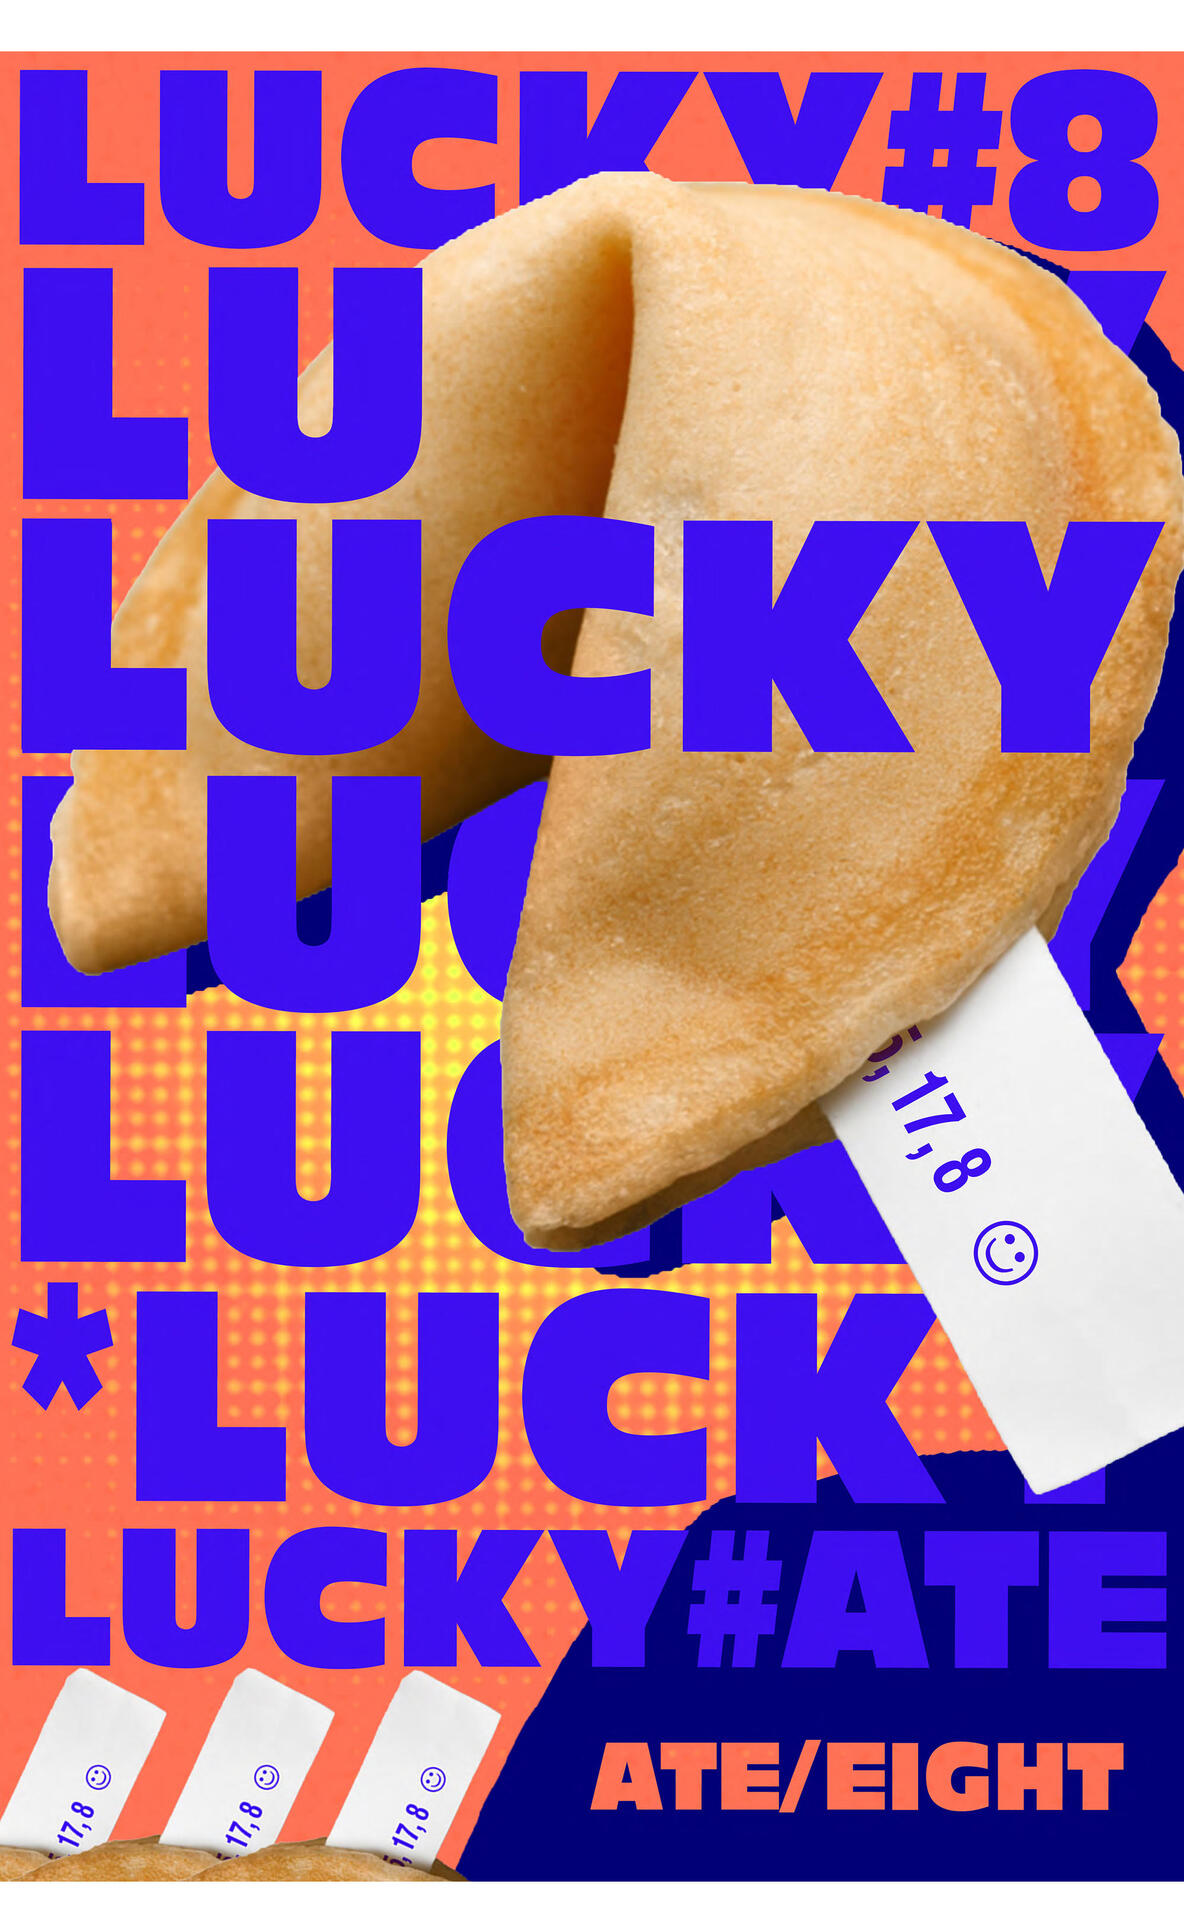 Homonym Poster saying "Lucky" and "Ate/Eight" ; Chase Schulte